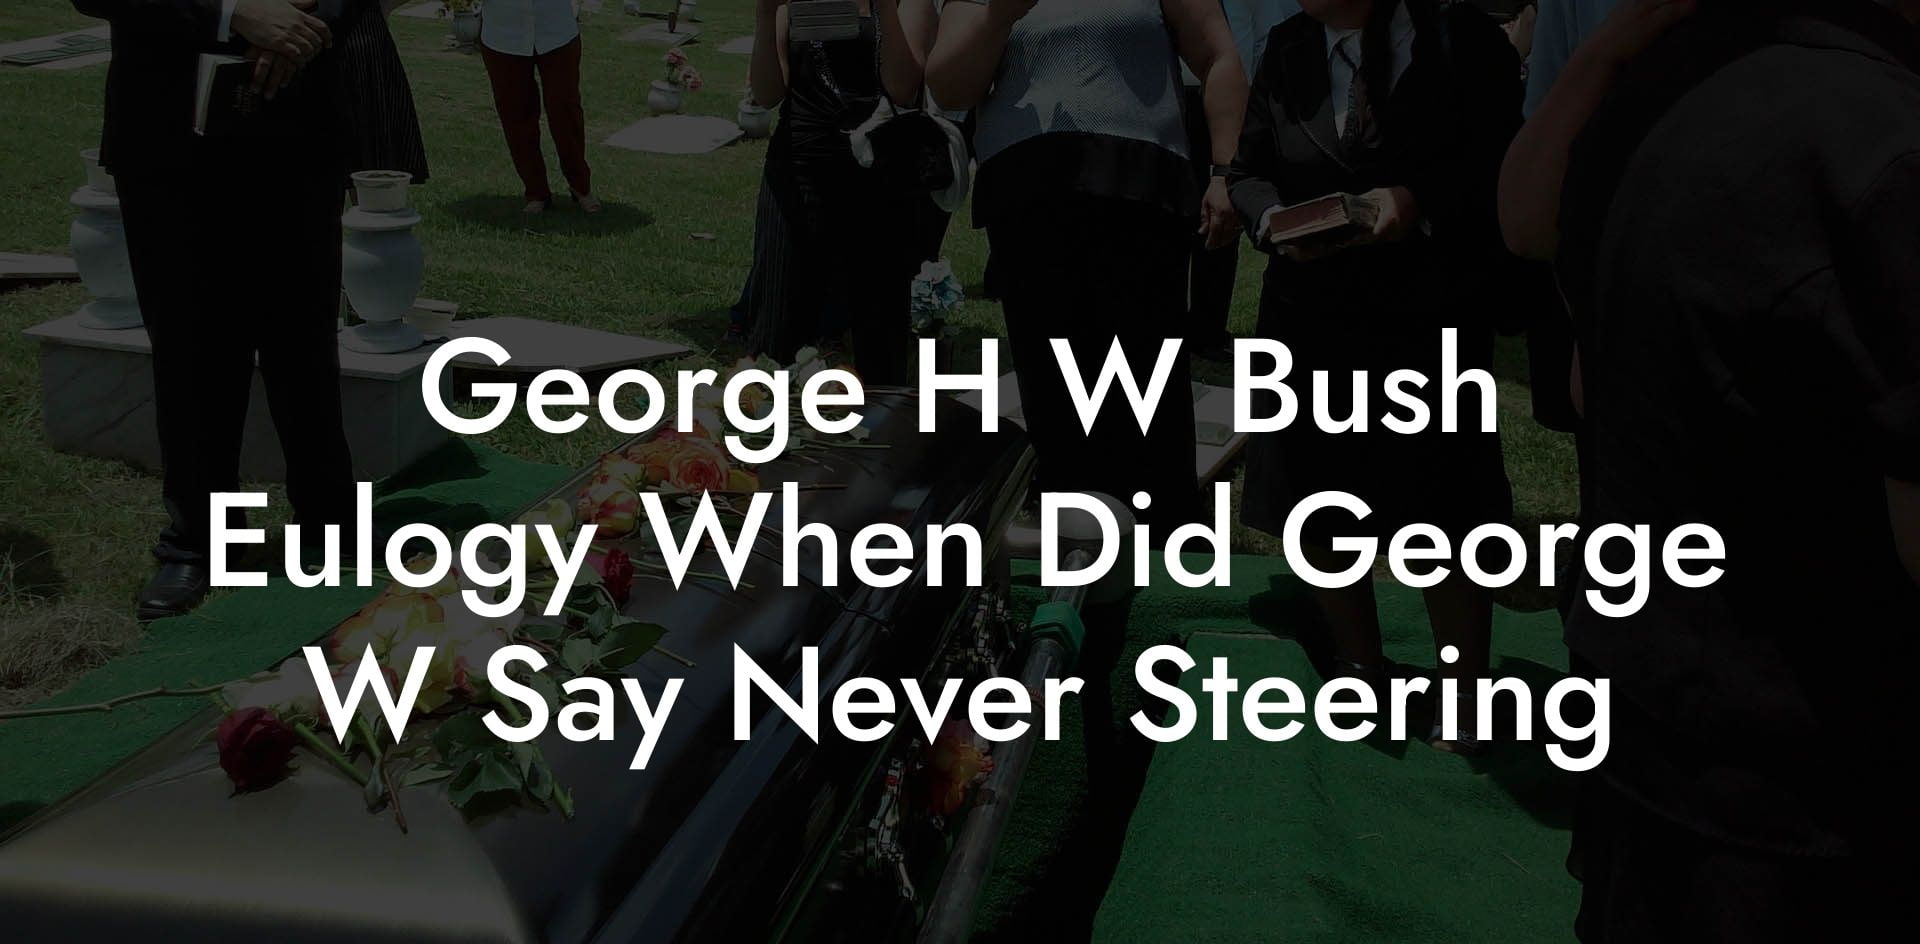 George H W Bush Eulogy When Did George W Say Never Steering